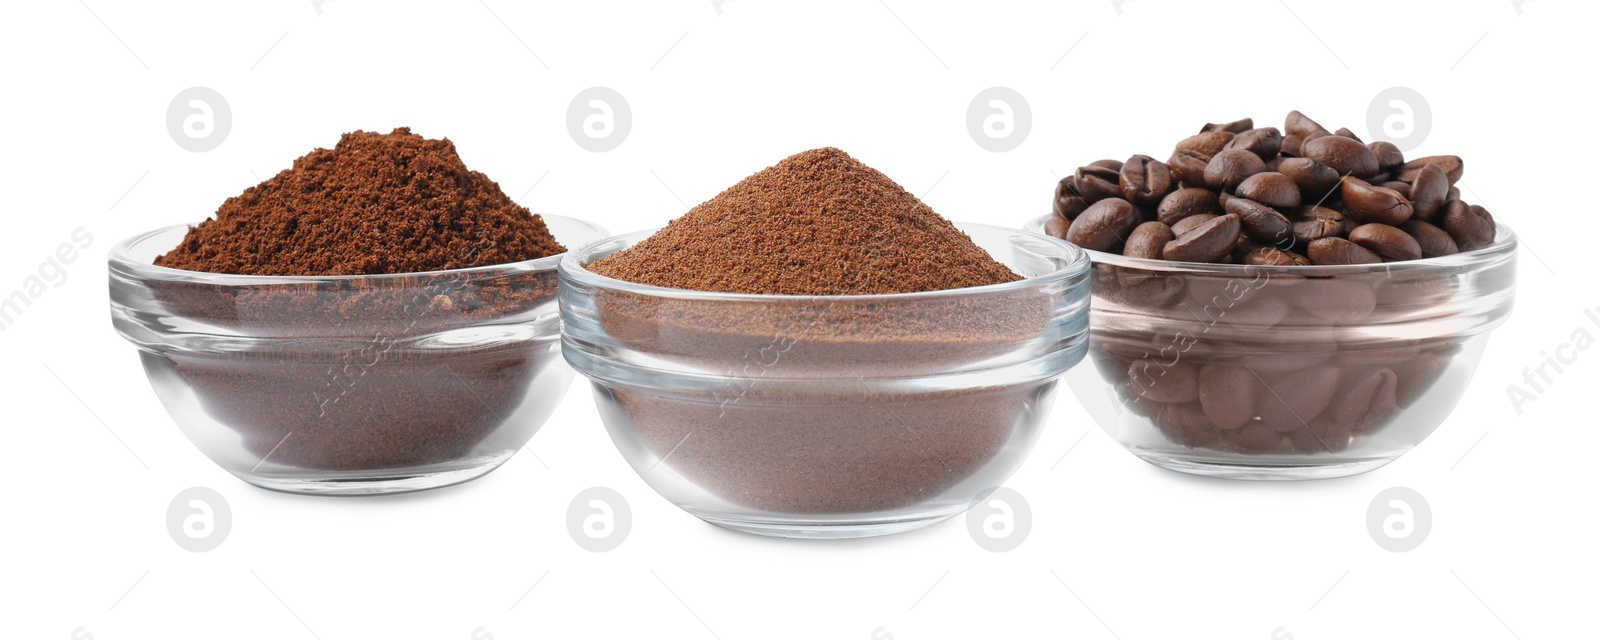 Photo of Bowls with different types of coffee on white background